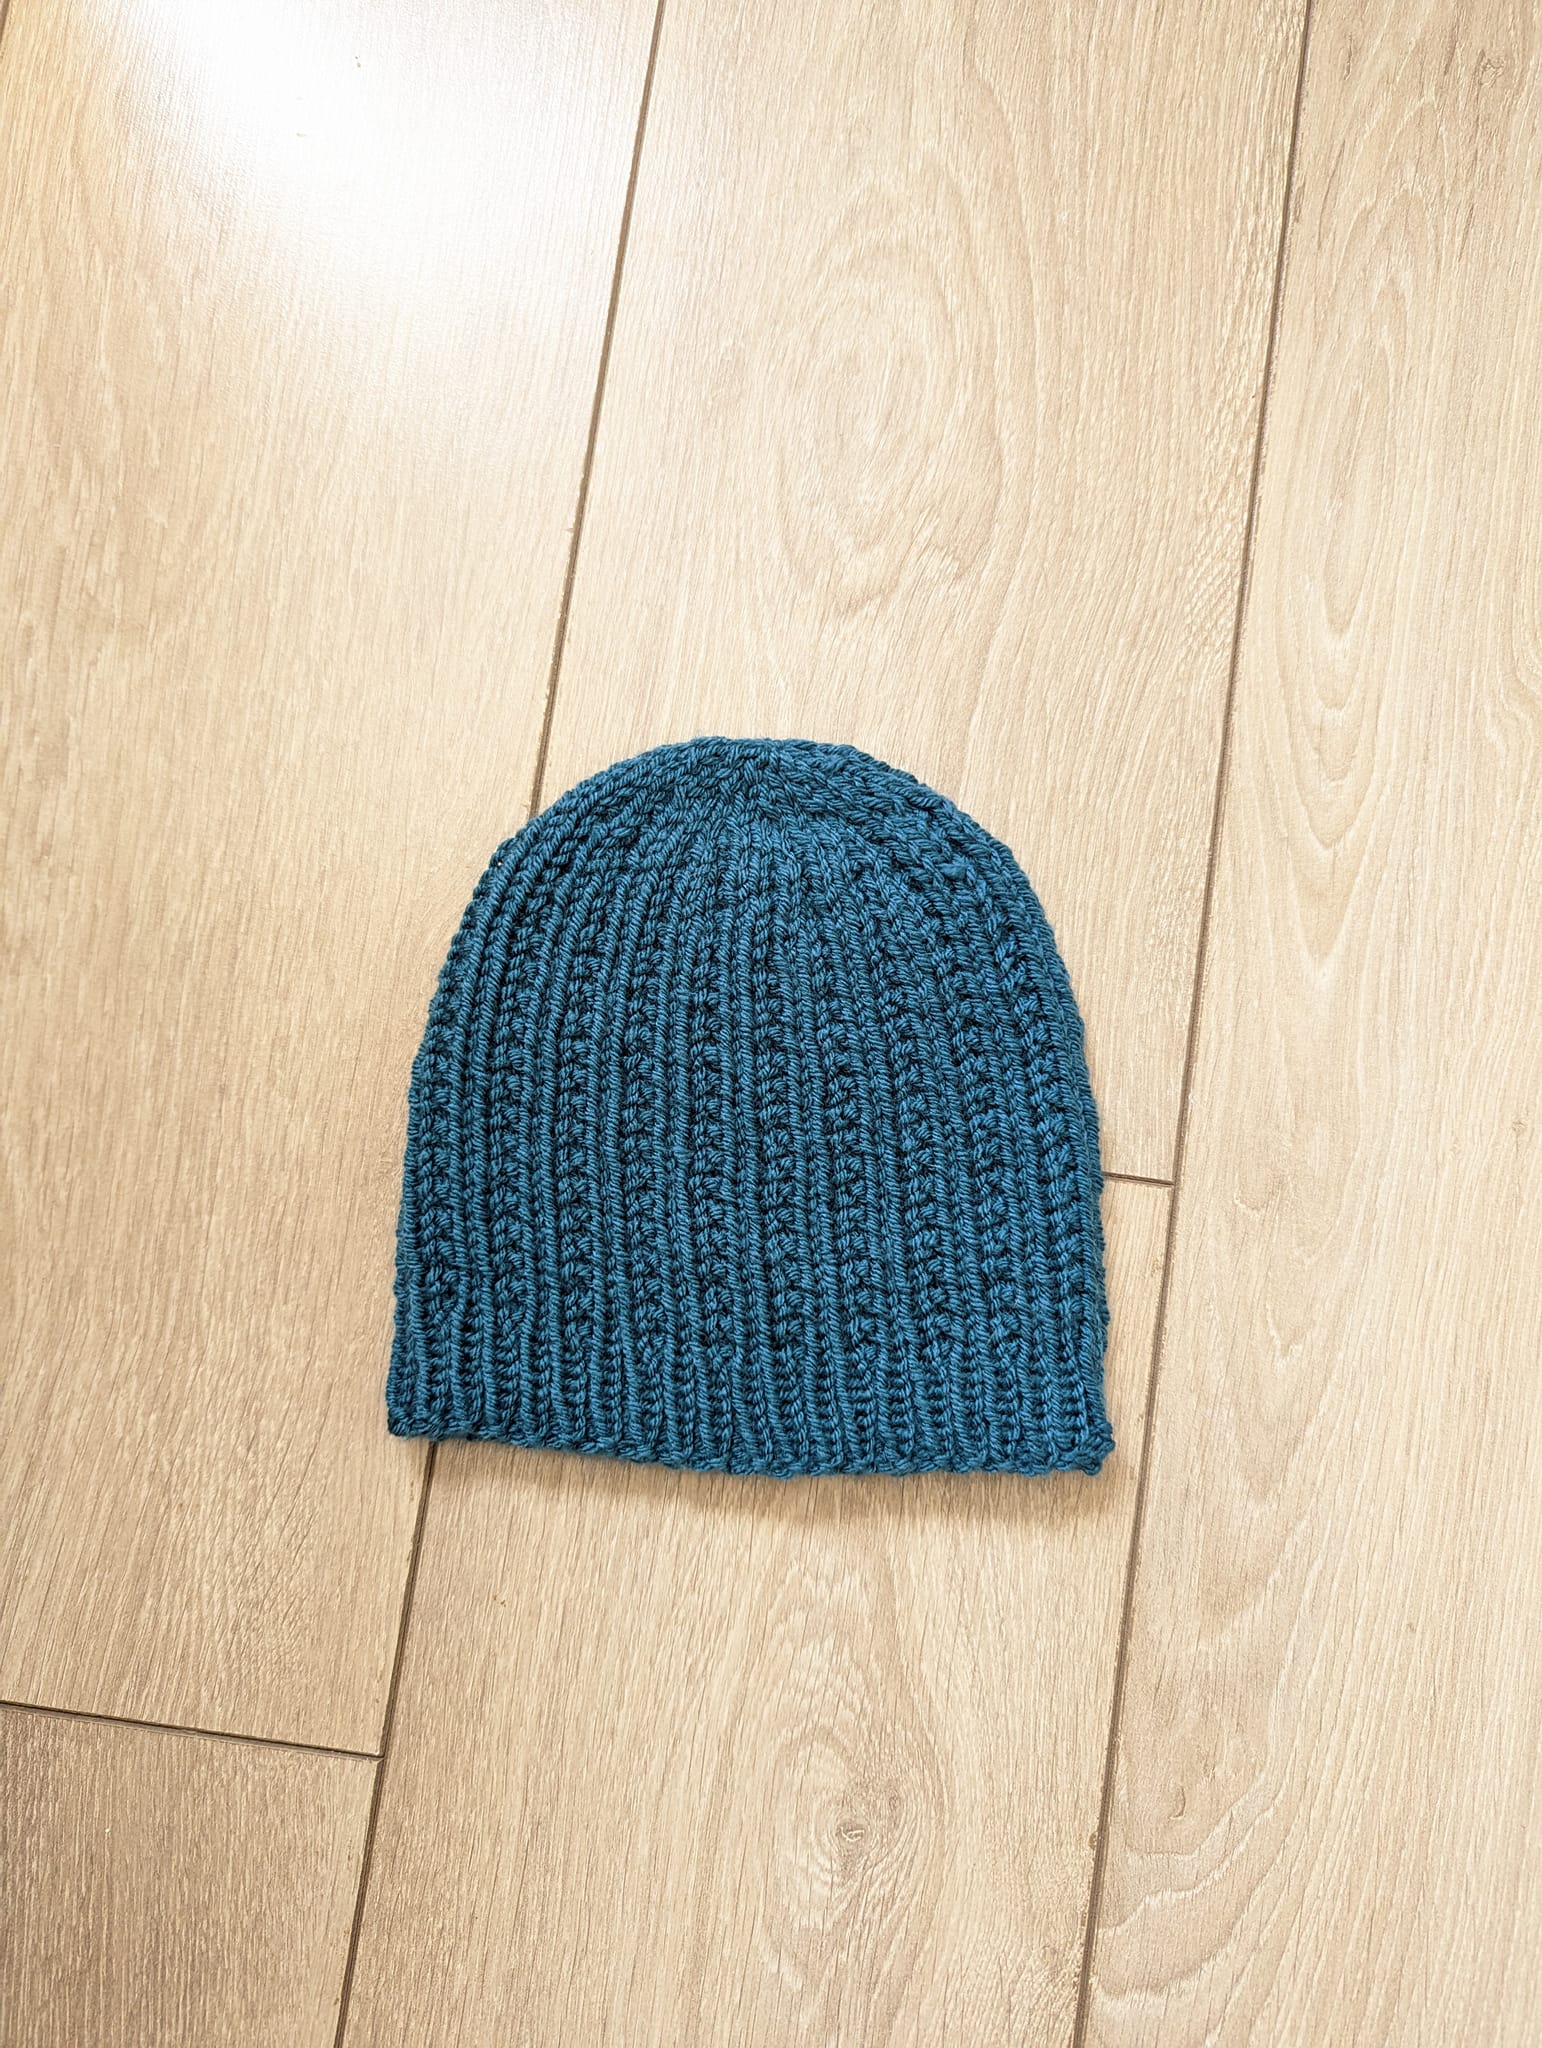 A blue knitted hat on a beige surface